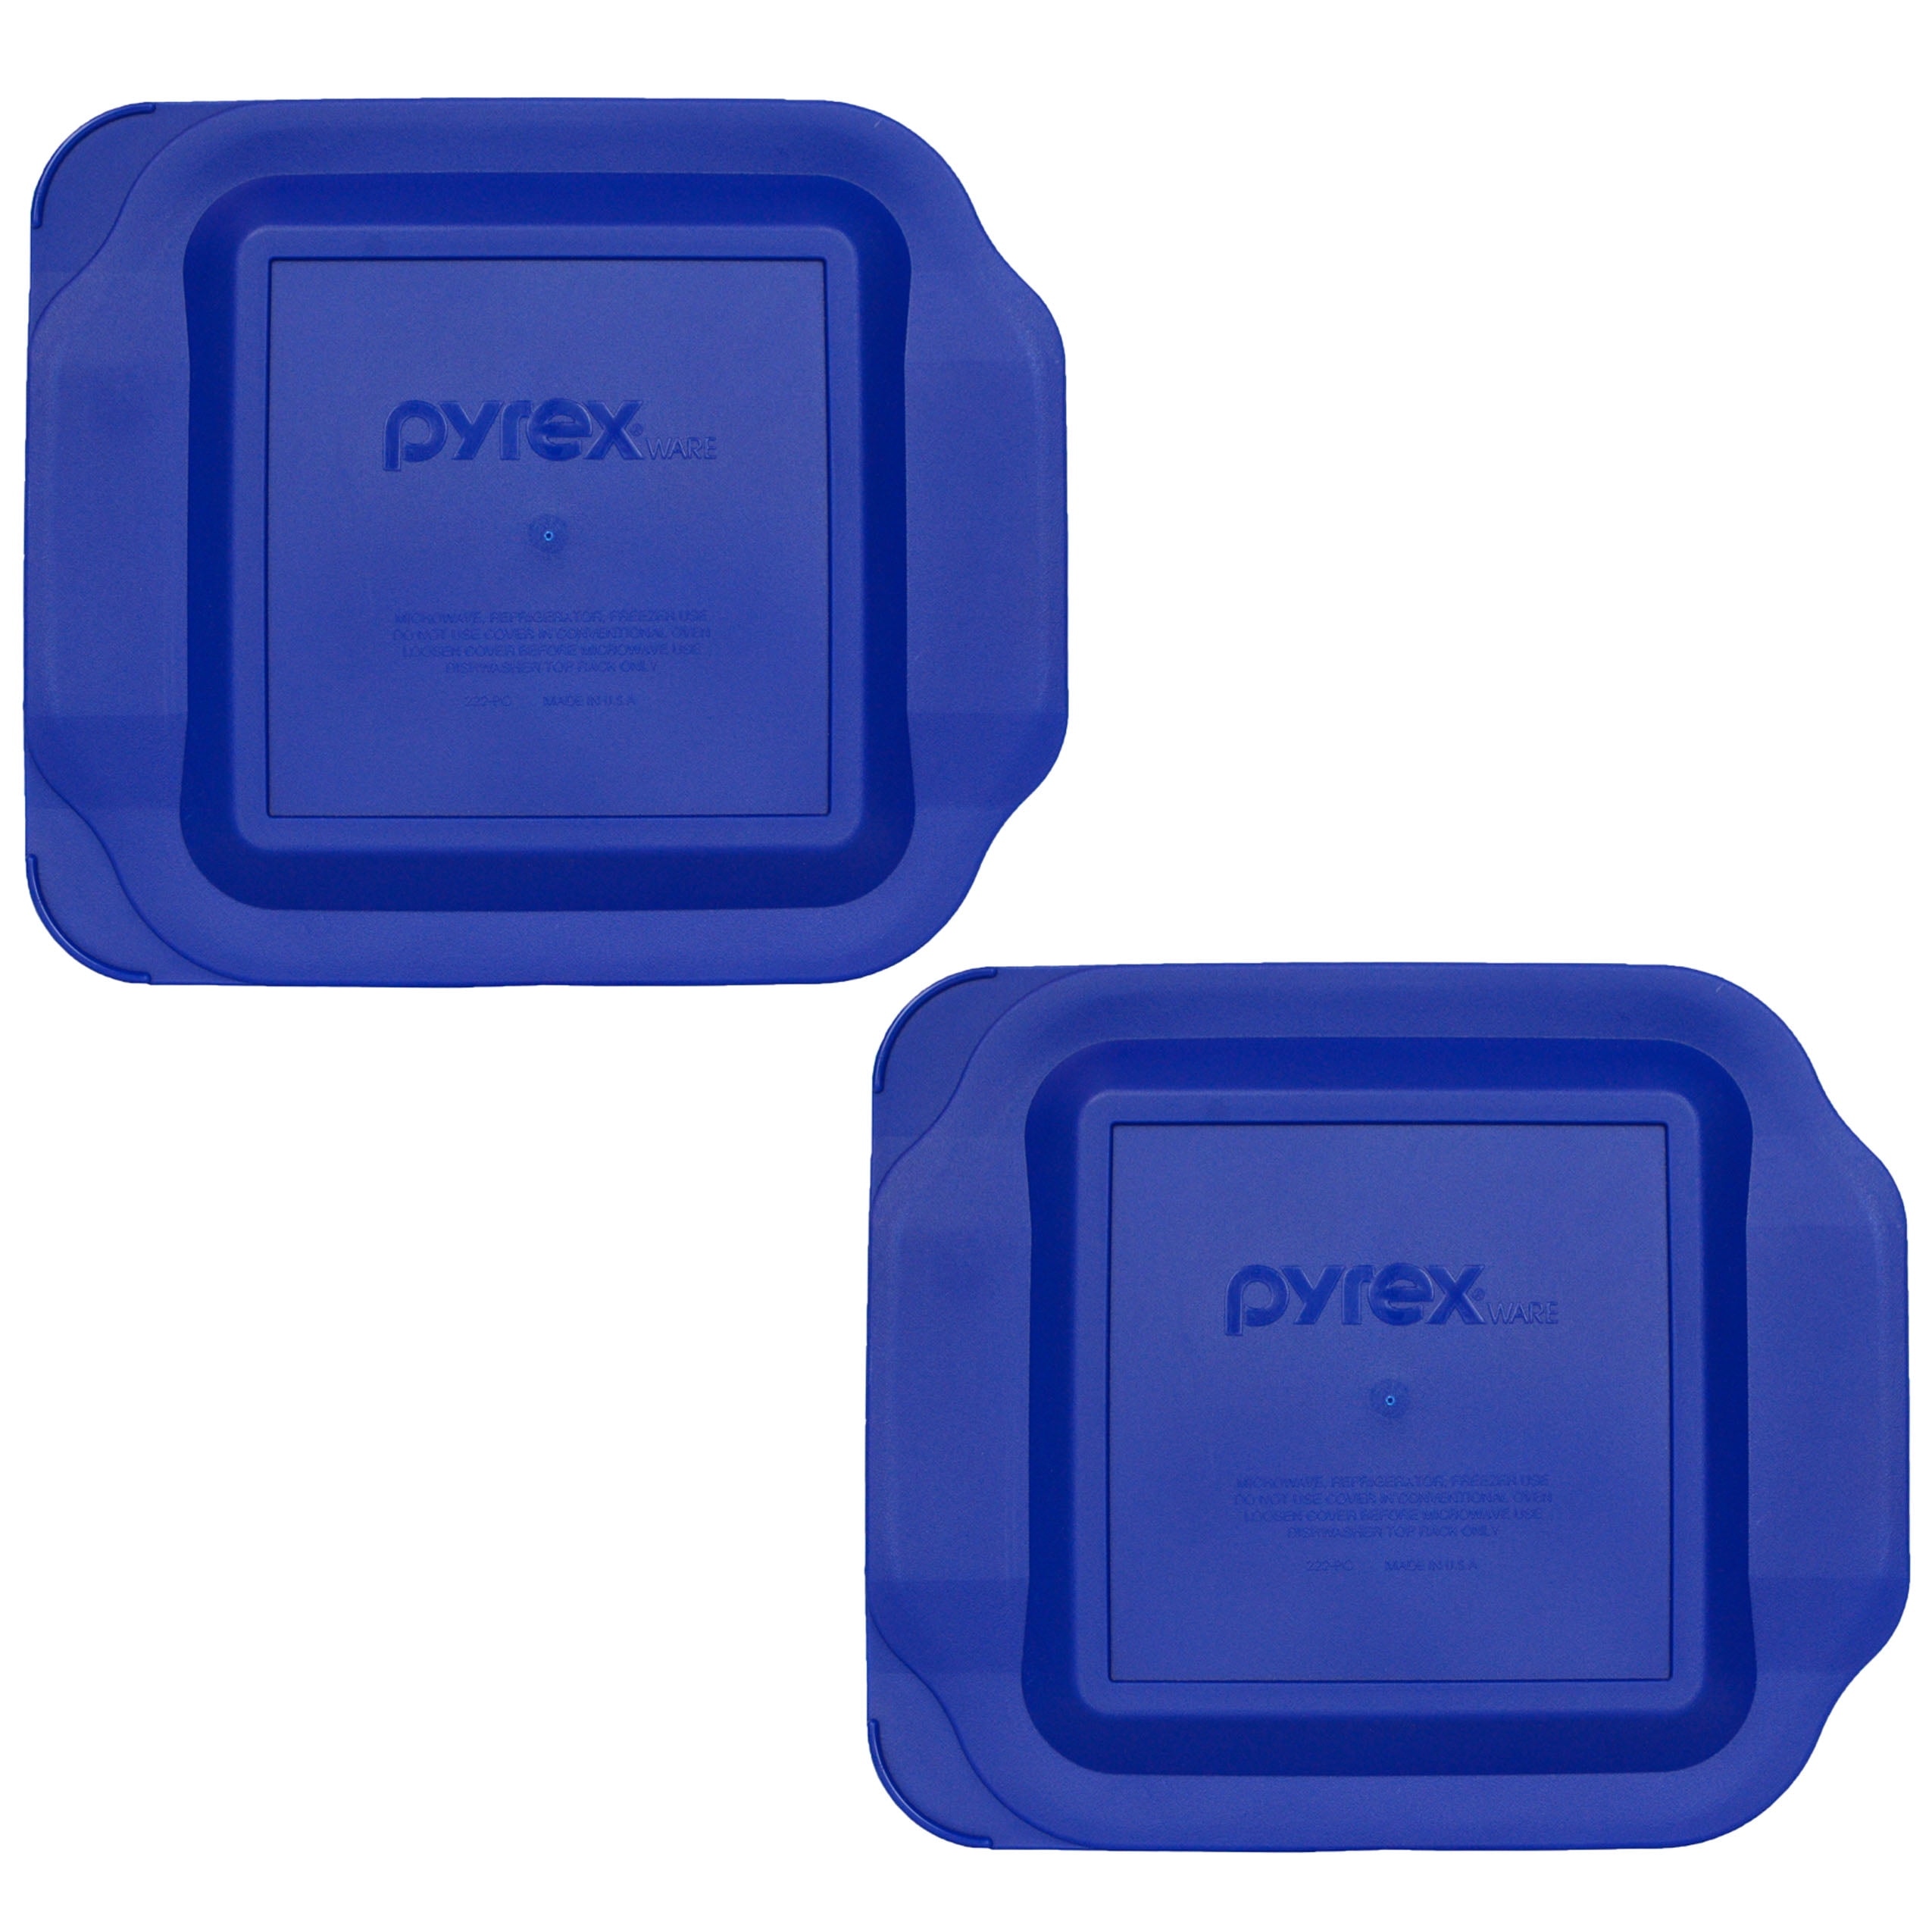 New Pyrex 222-PC Red 2Qt Square Plastic Storage Lid Covers 3PK for Glass Dish 